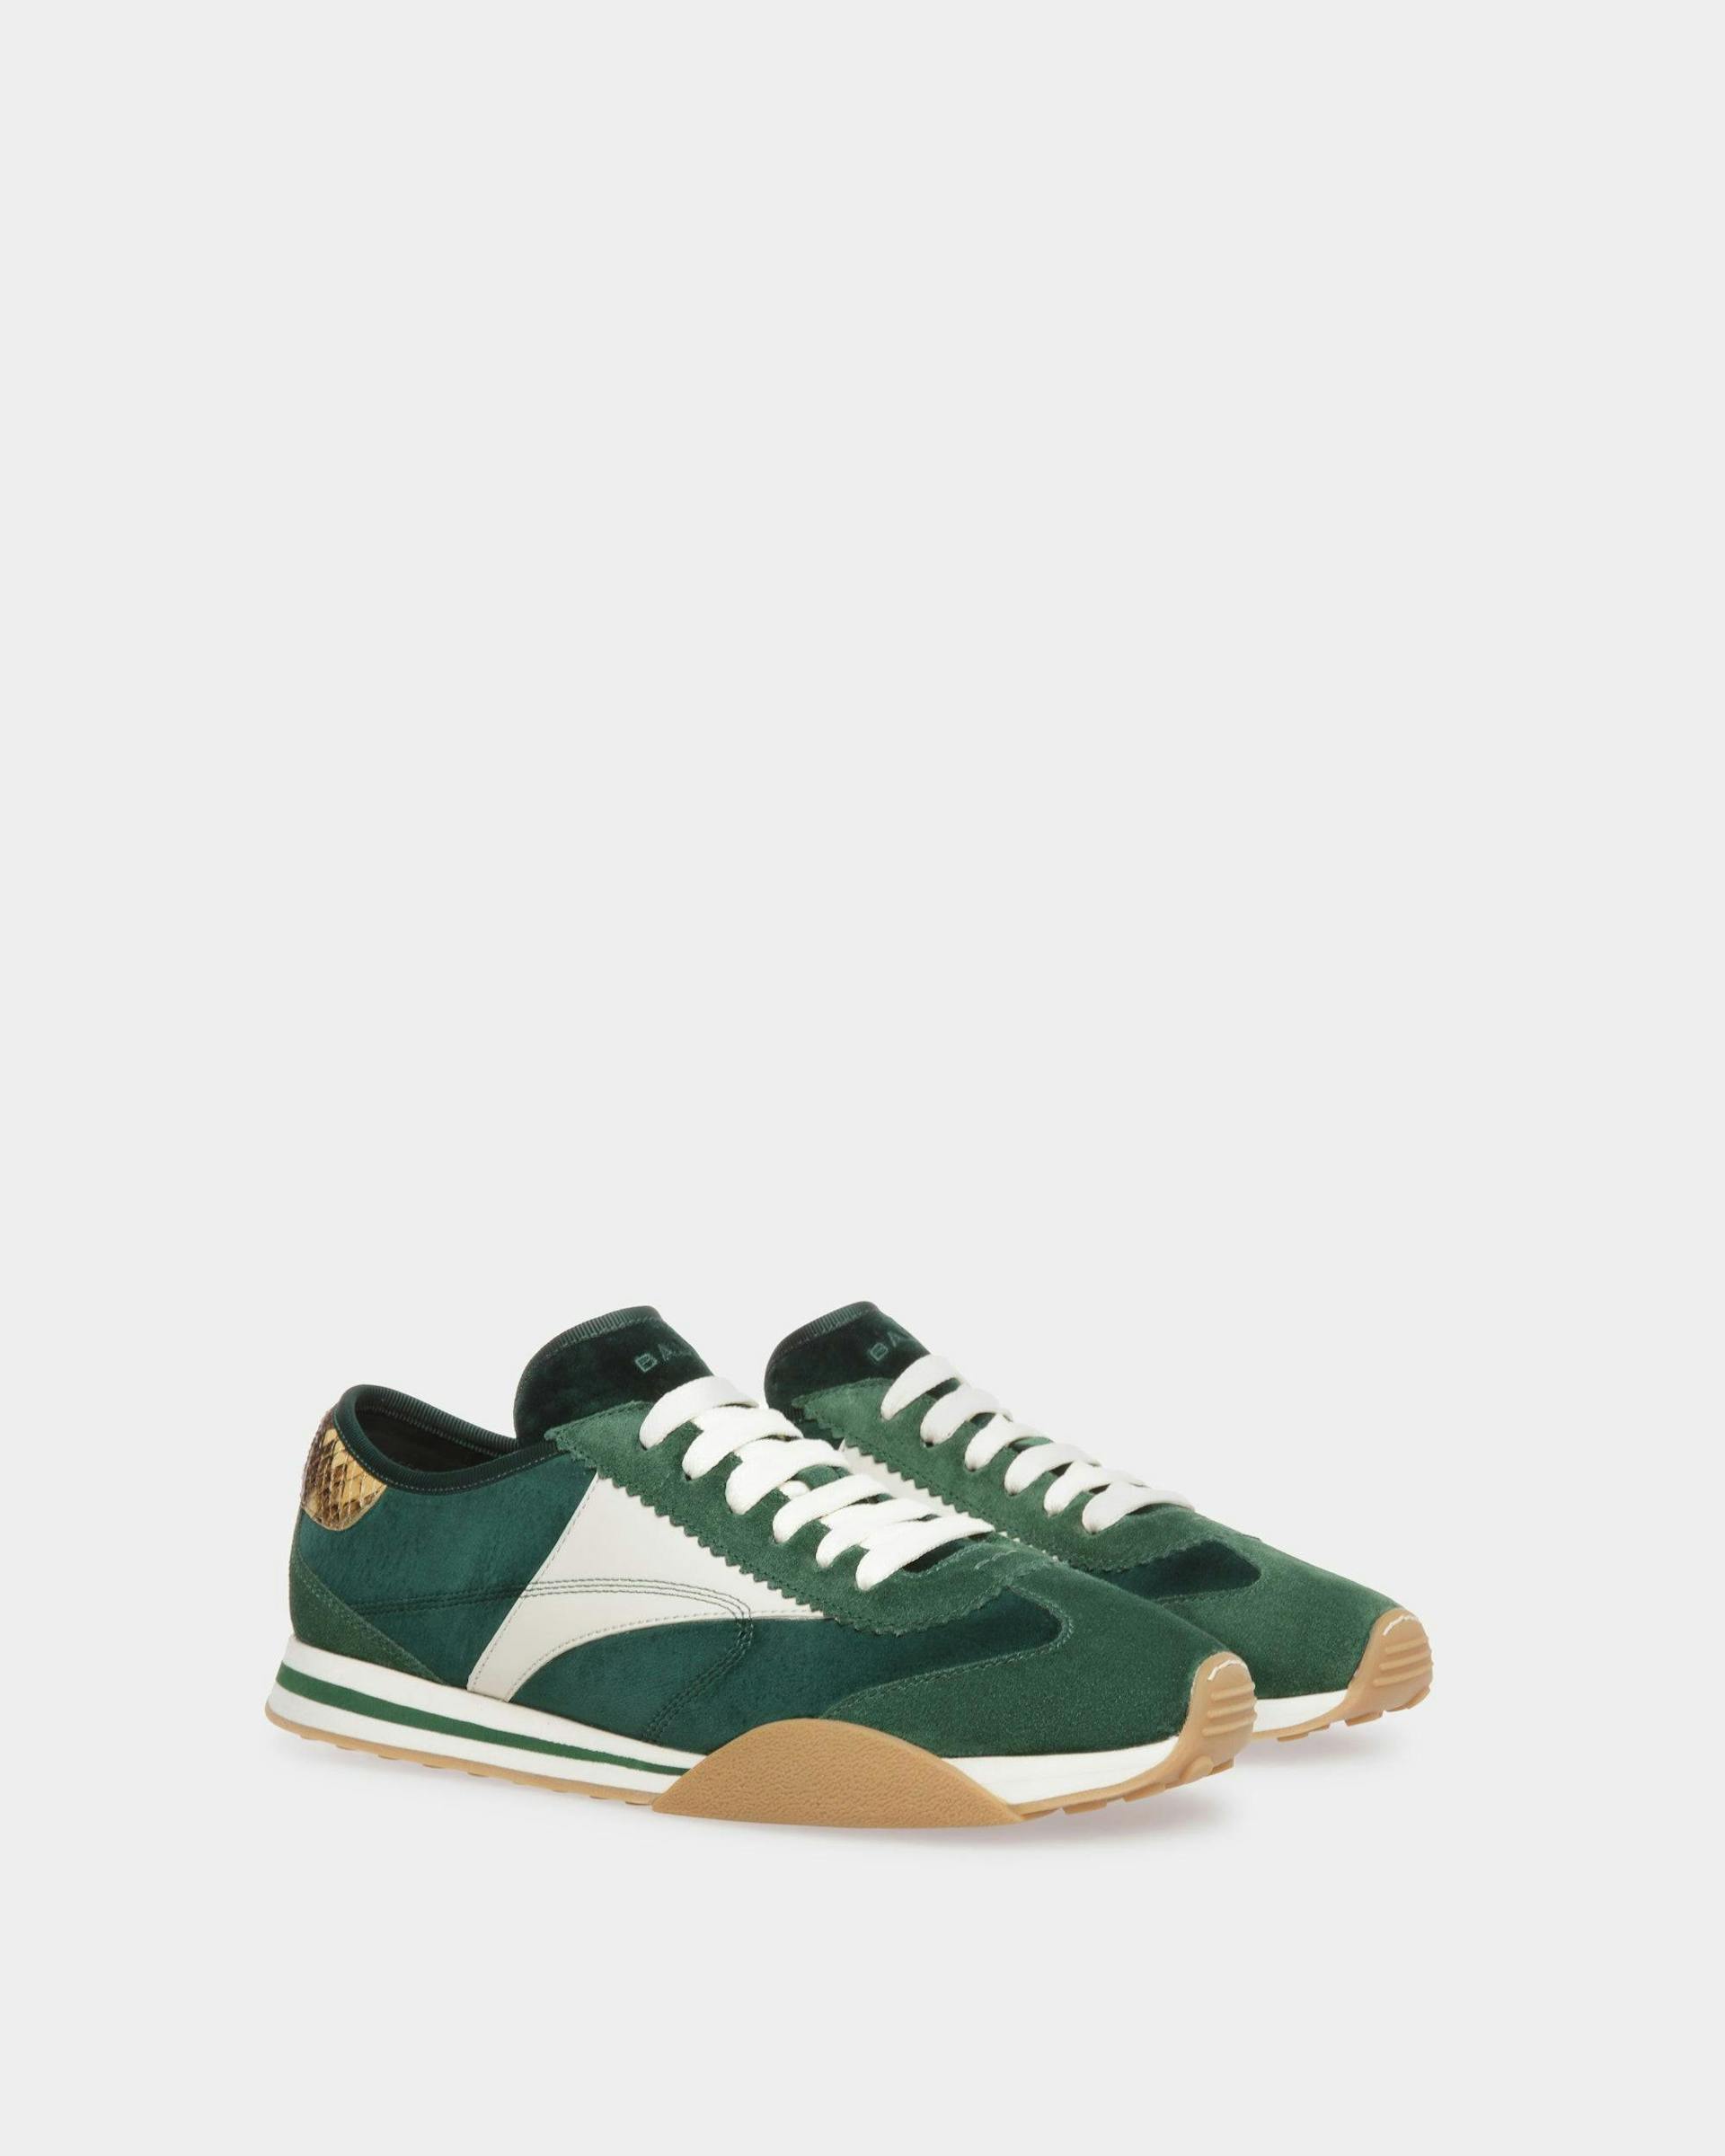 Sussex Sneakers In Green And Dusty White Leather And Cotton - Men's - Bally - 03